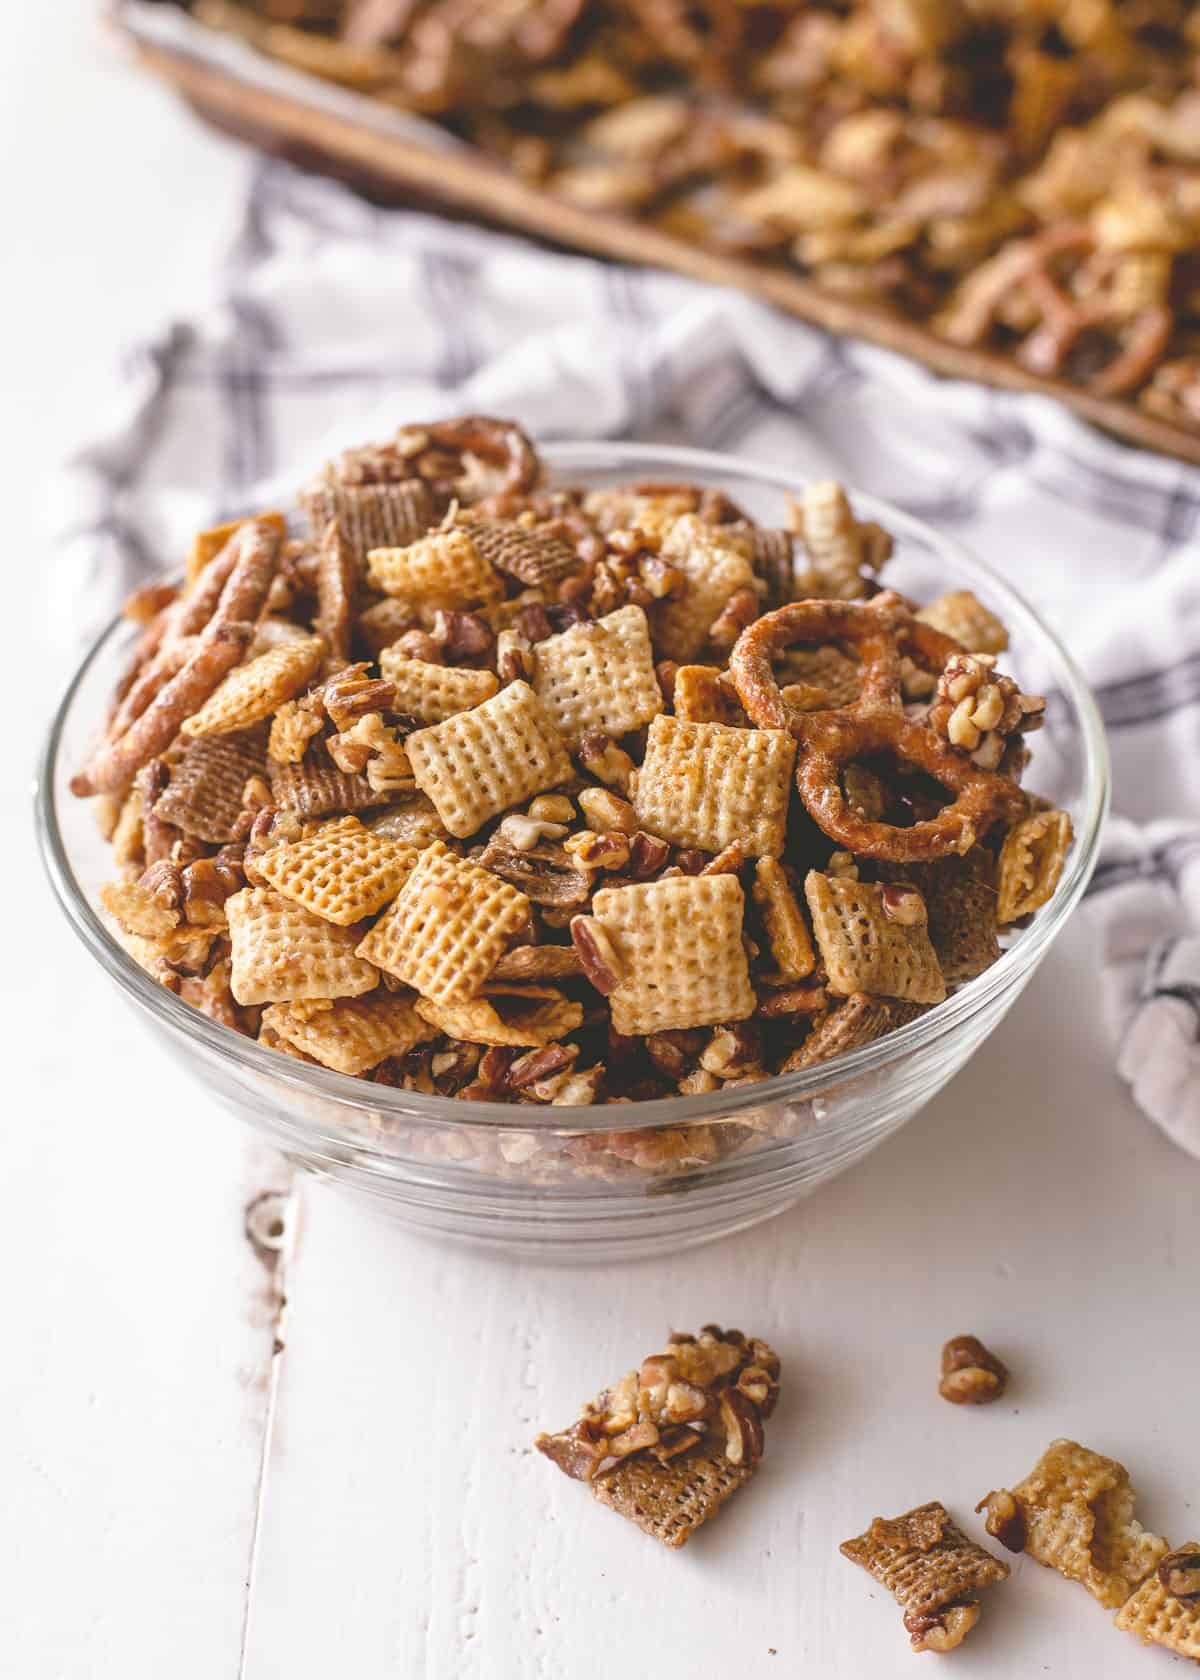 snack mix in a clear glass bowl